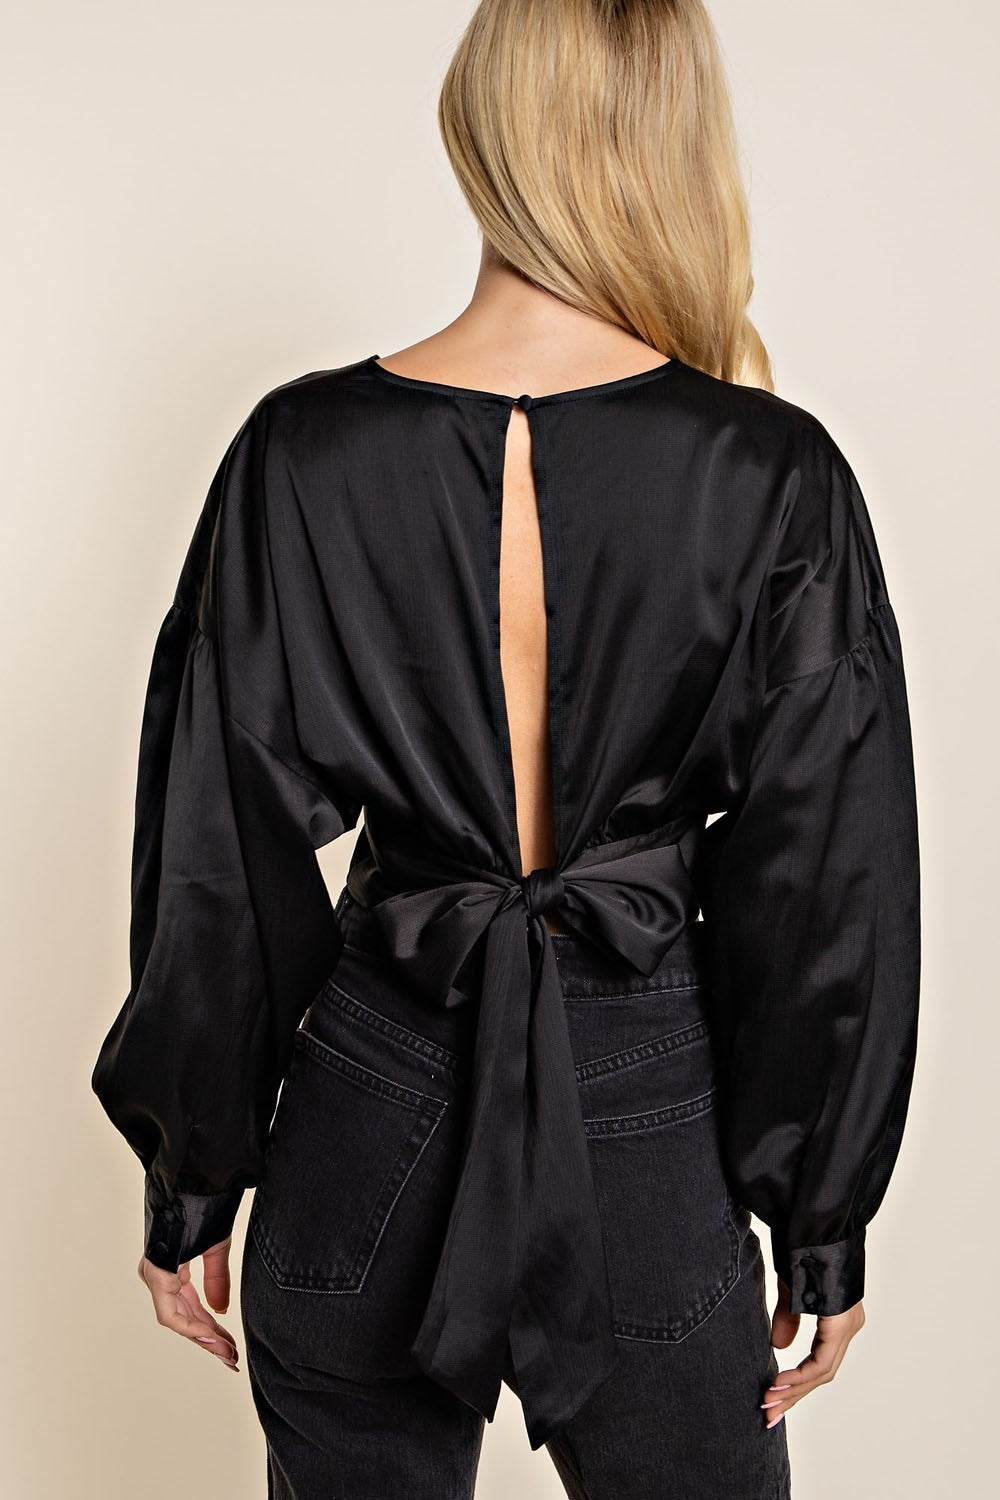 Black Long Sleeve Crop Top With Bow Detail